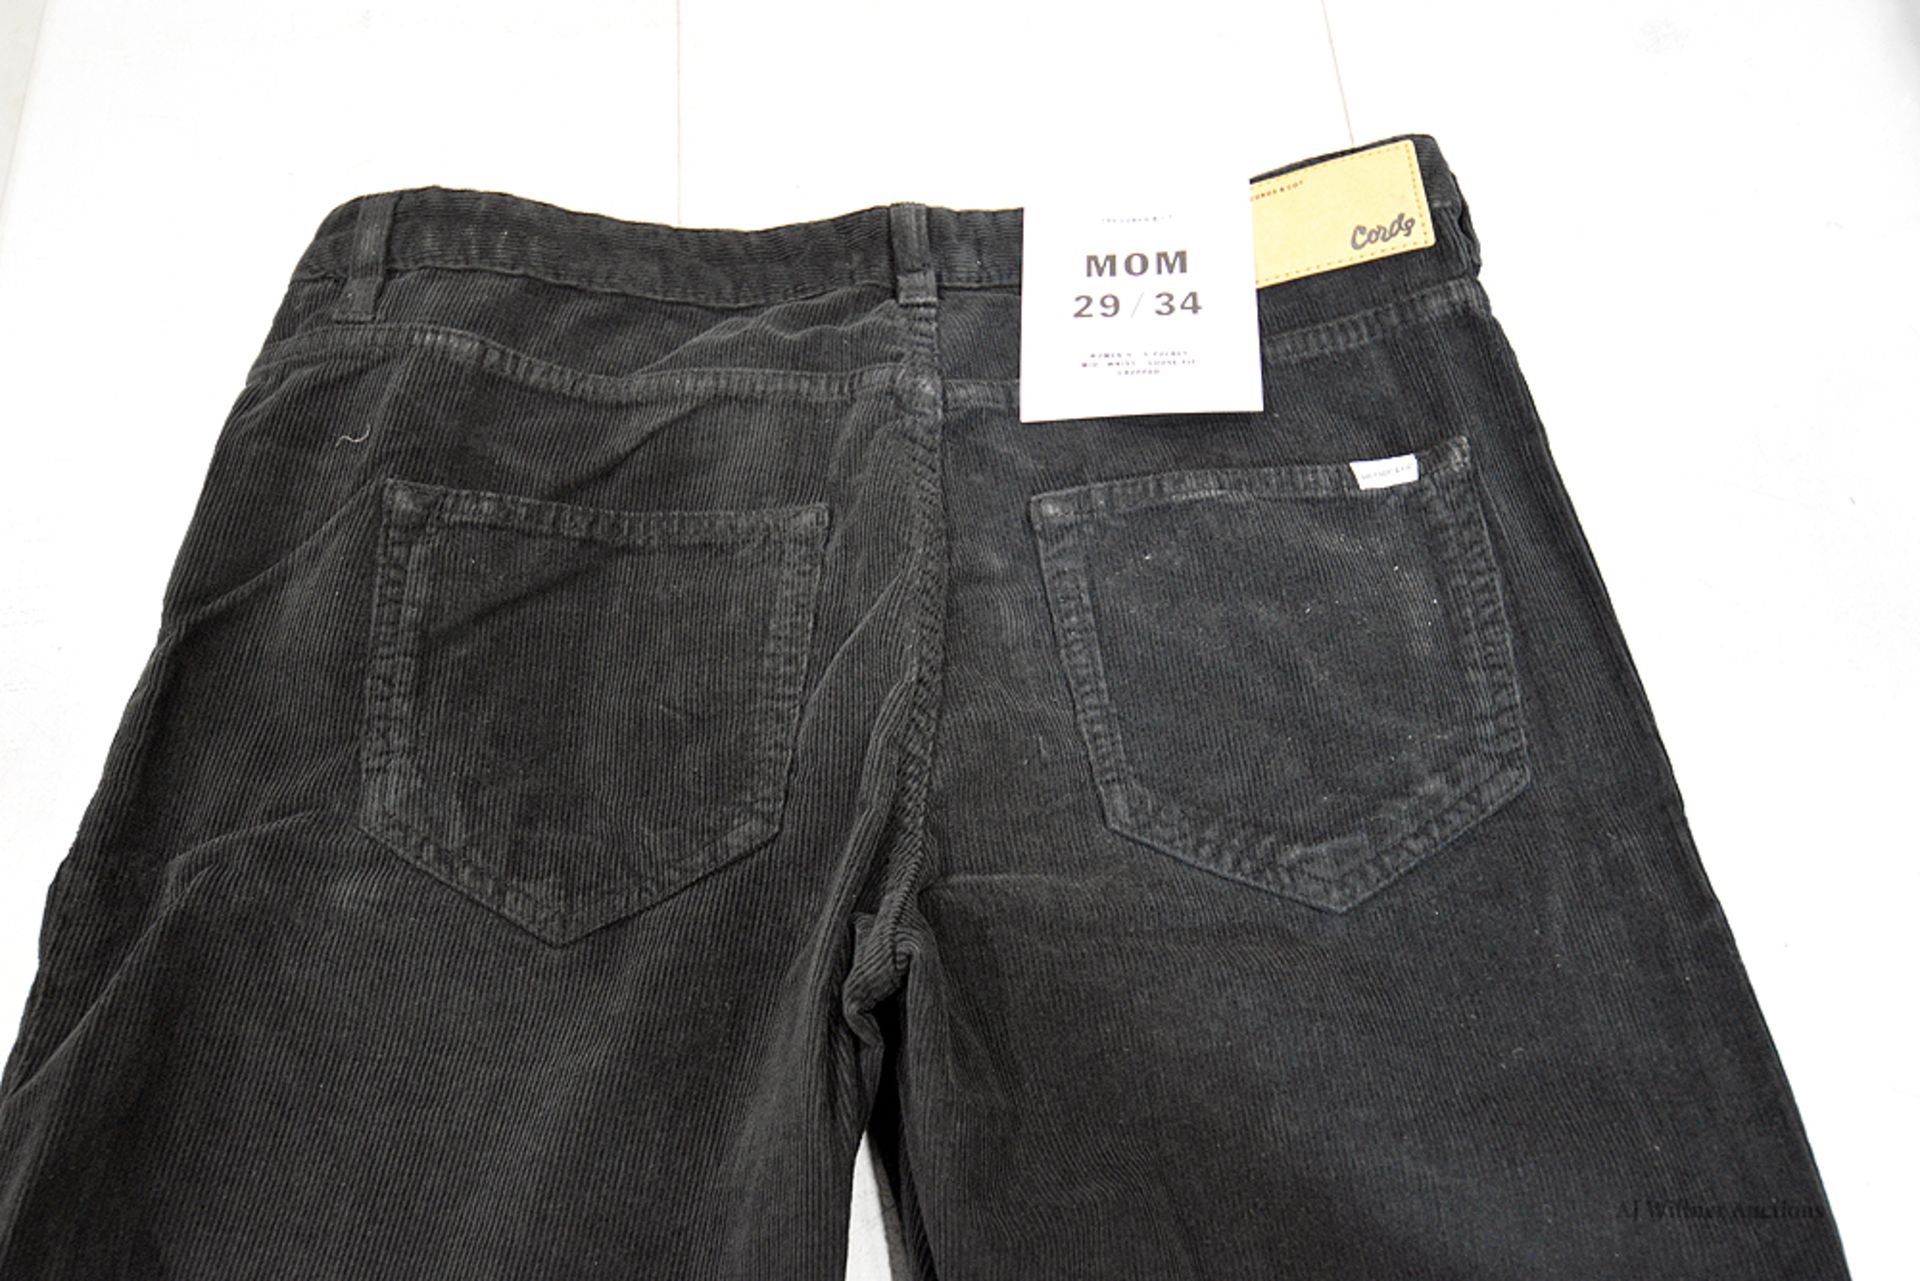 The Cords & Co. "Mom" Women's/ Mid-Waist/ Loose Fit/ Chopped Pants MSRP $160 - Image 3 of 5